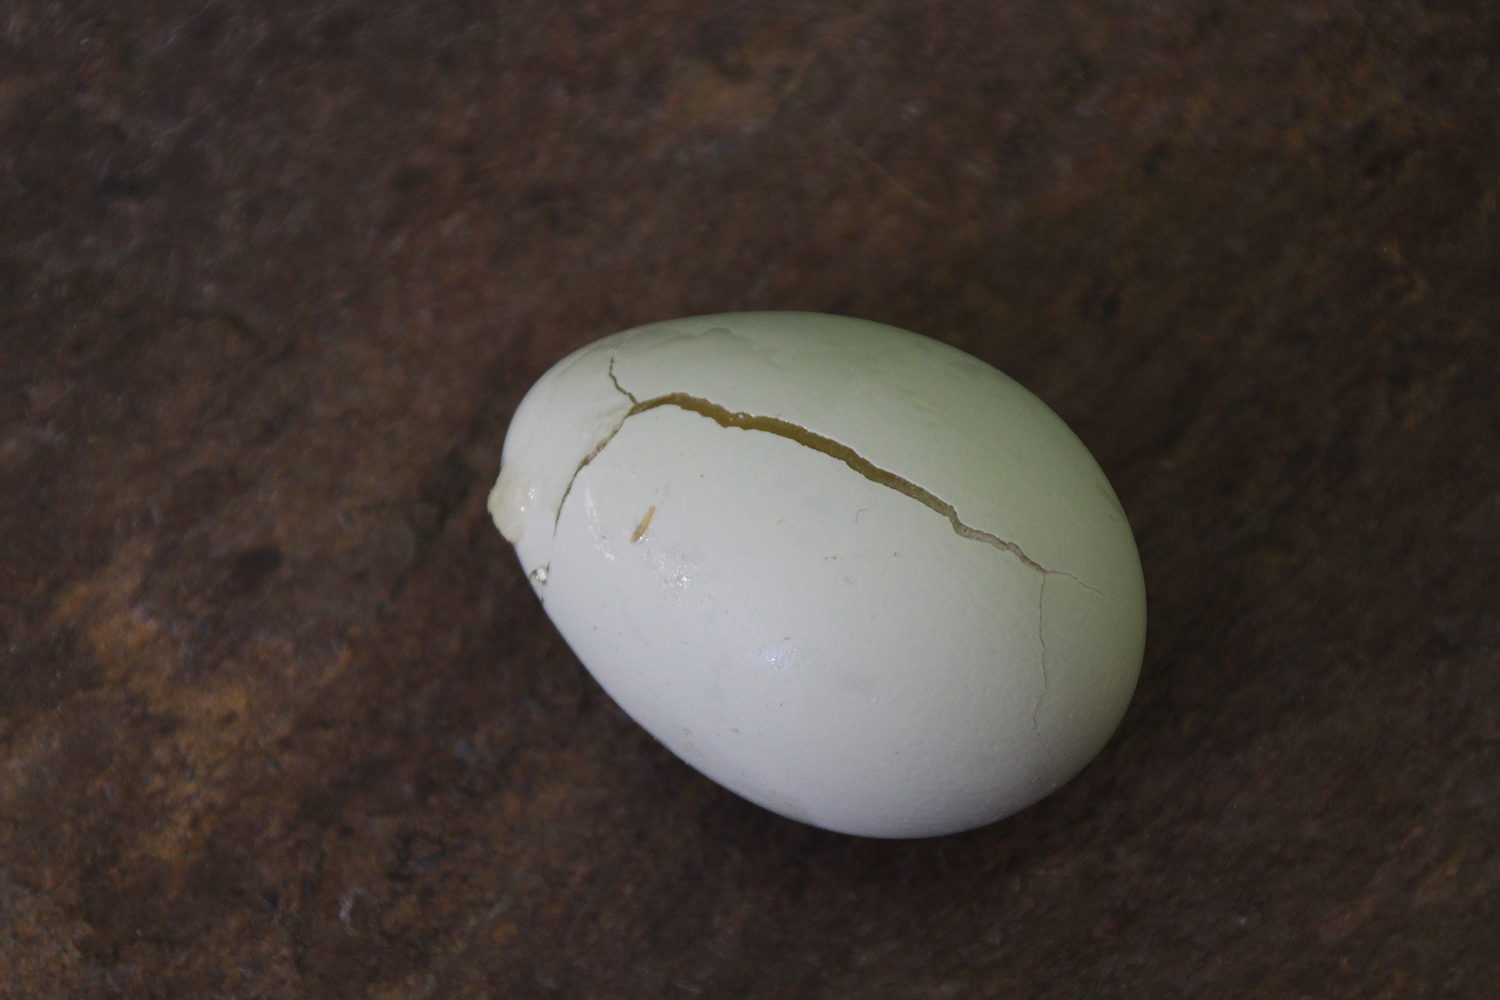 An egg with a cracked shell